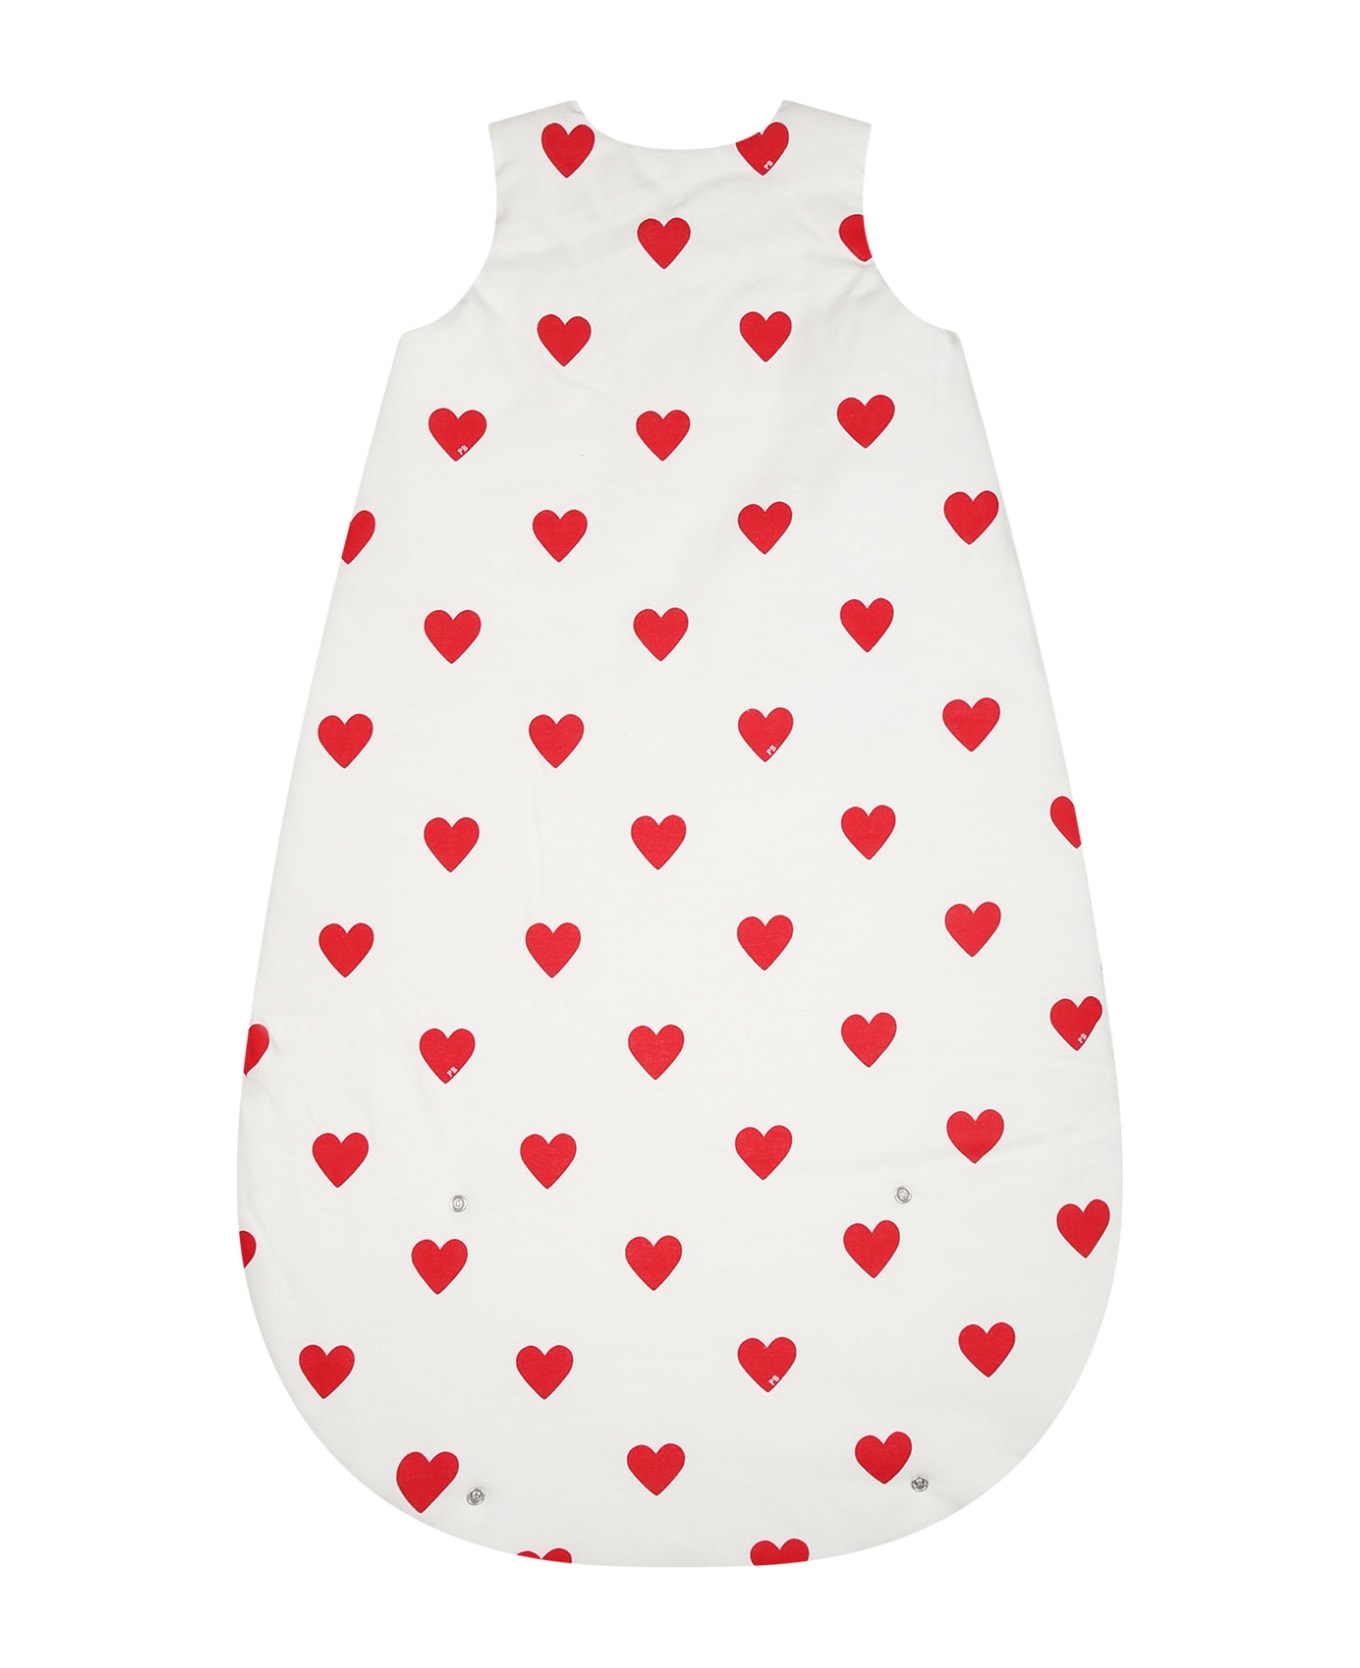 Petit Bateau White Sleeping Bag For Baby Girl With Hearts - White アクセサリー＆ギフト